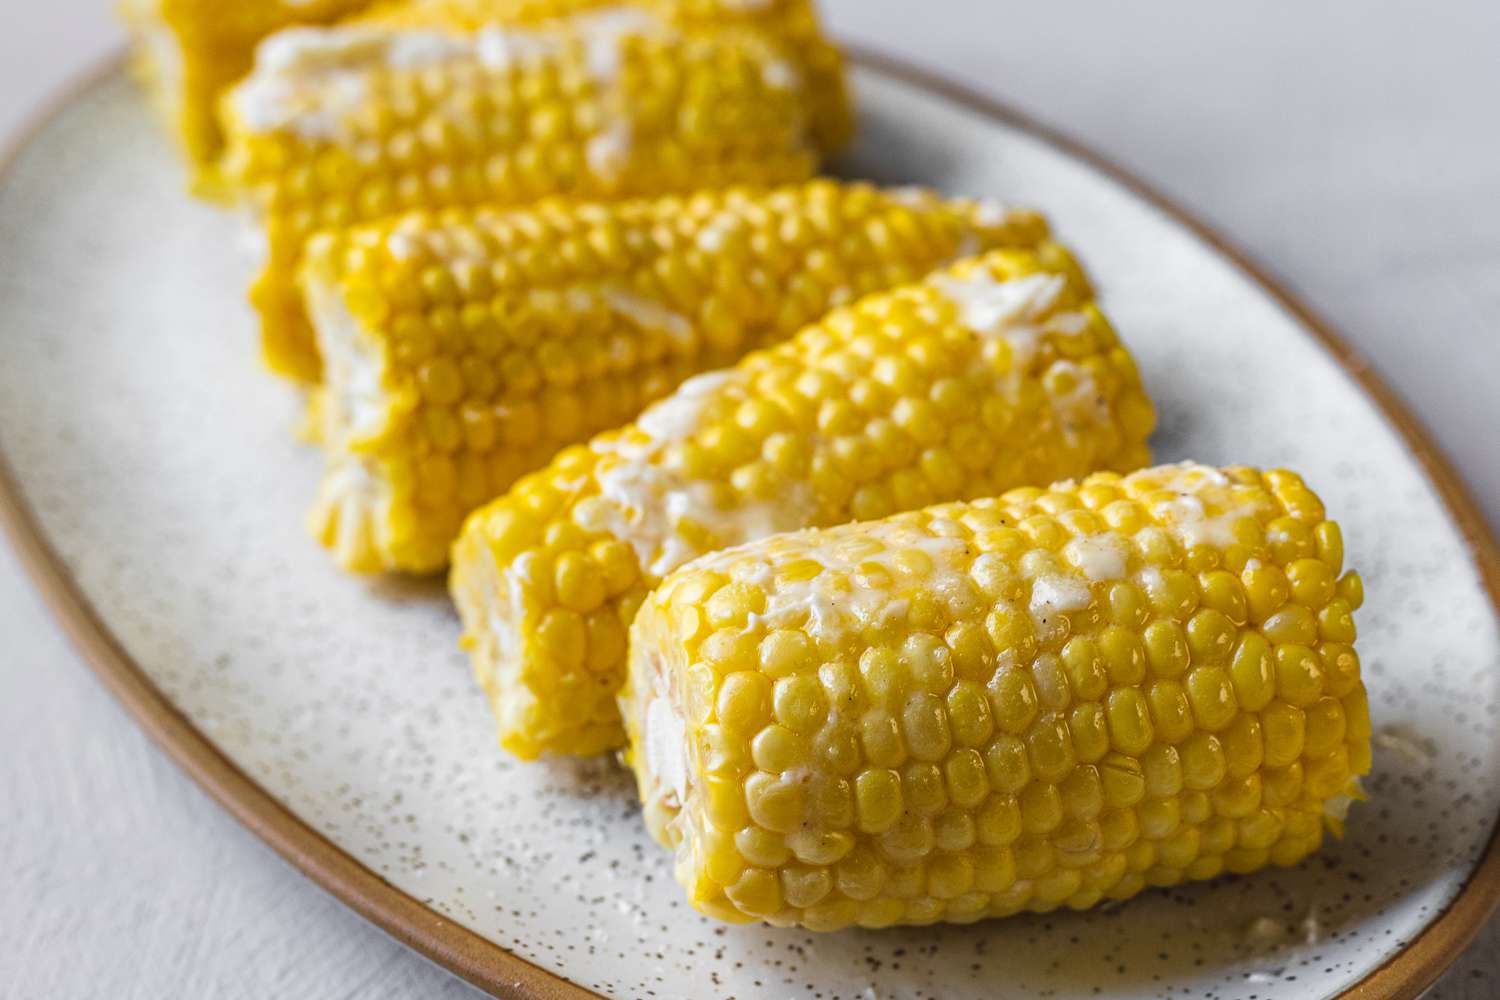 Steamed corn on the cob